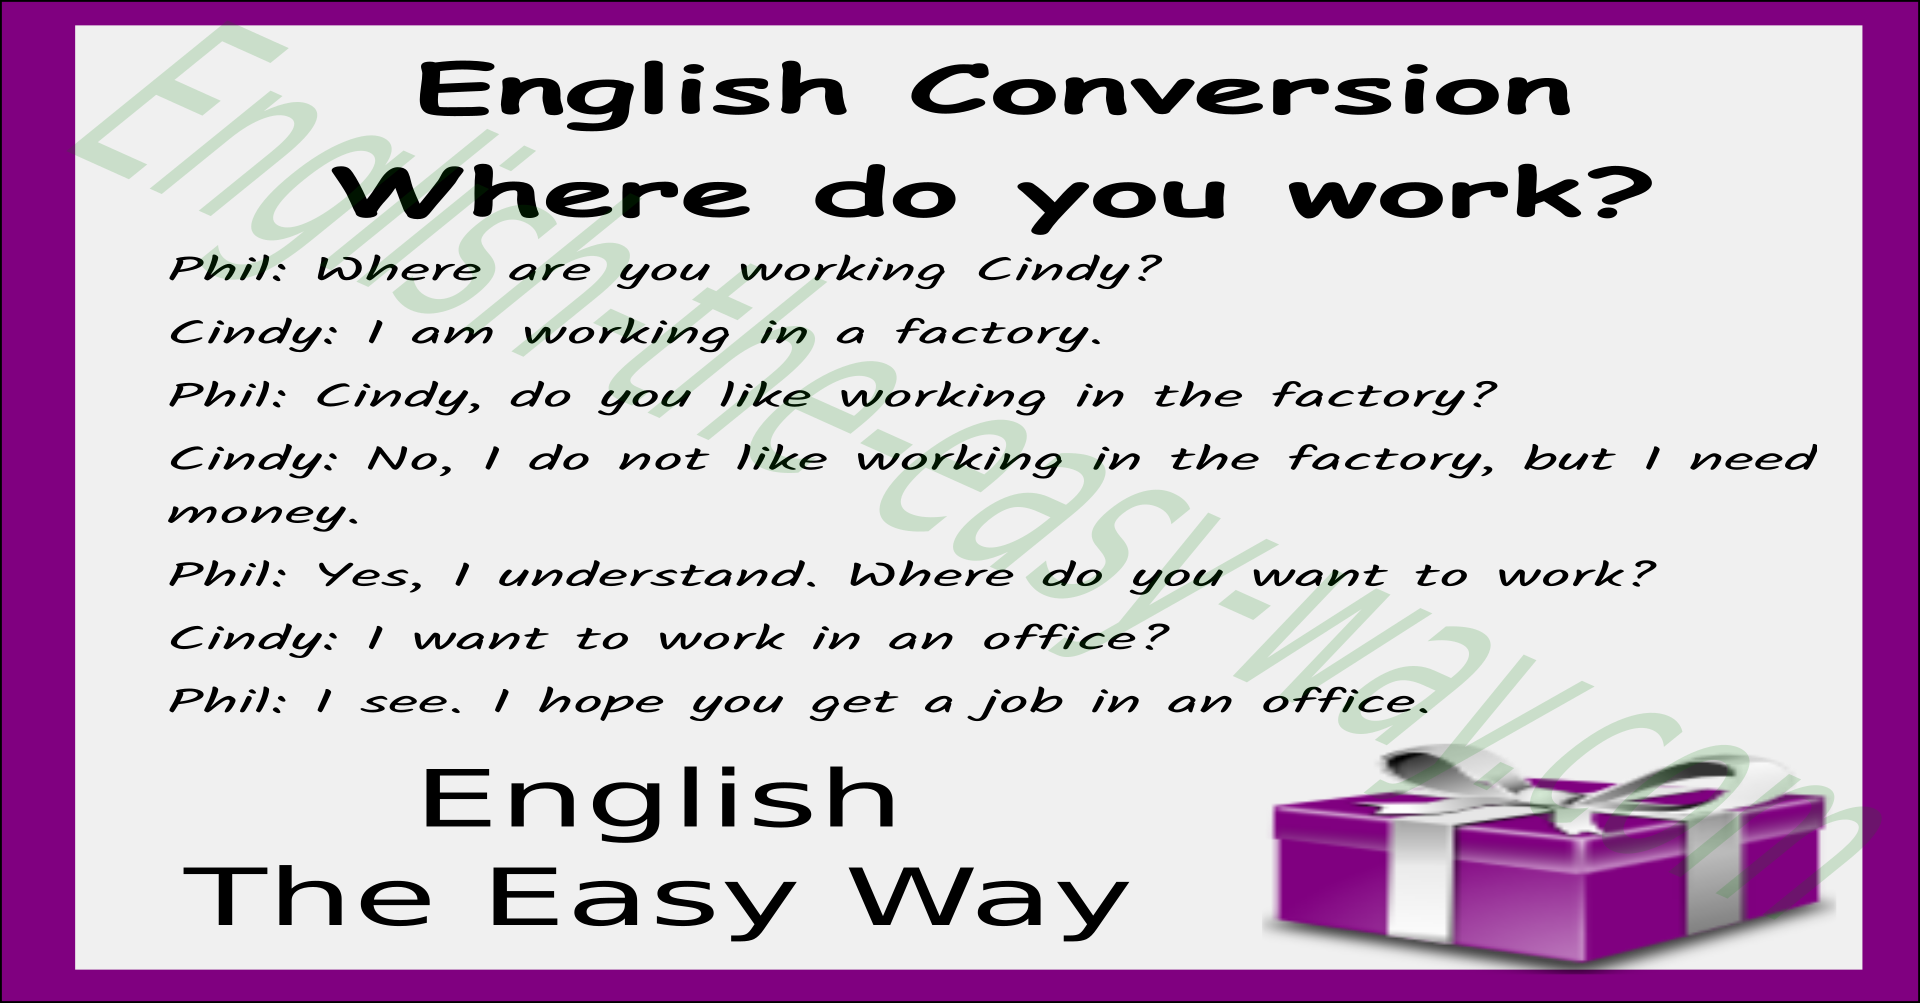 What are you doing? Conversation With Voice/Audio& Dialogs - Speaking  English - English The Easy Way